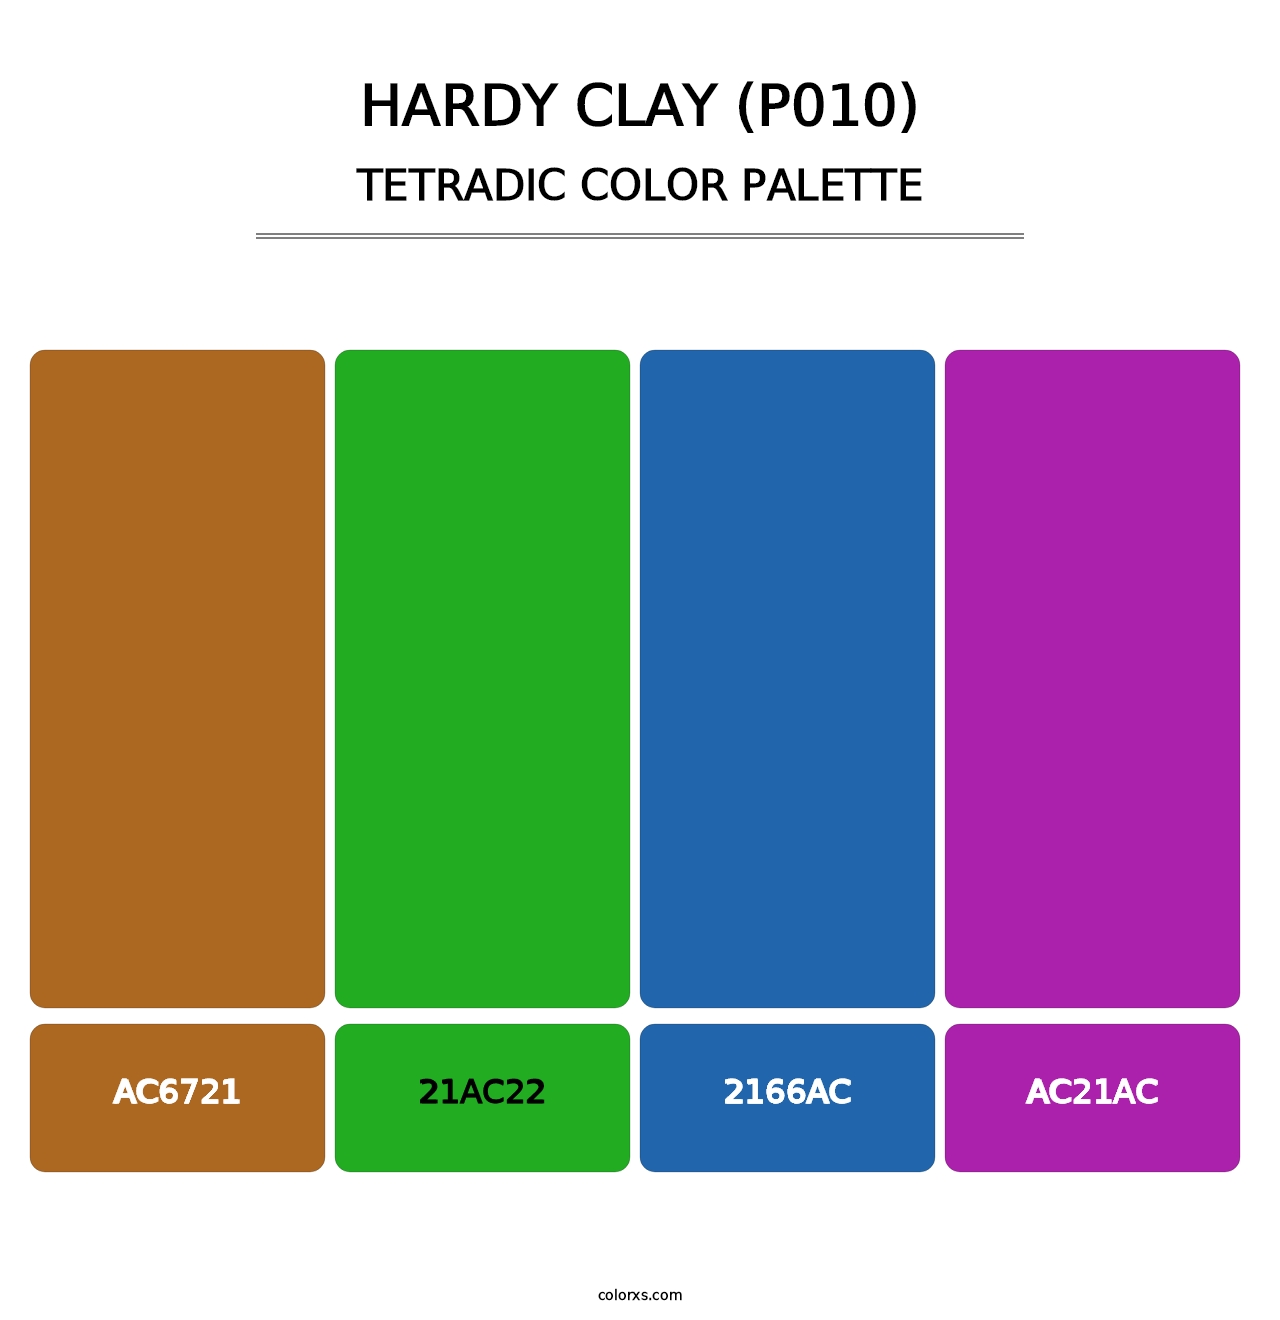 Hardy Clay (P010) - Tetradic Color Palette